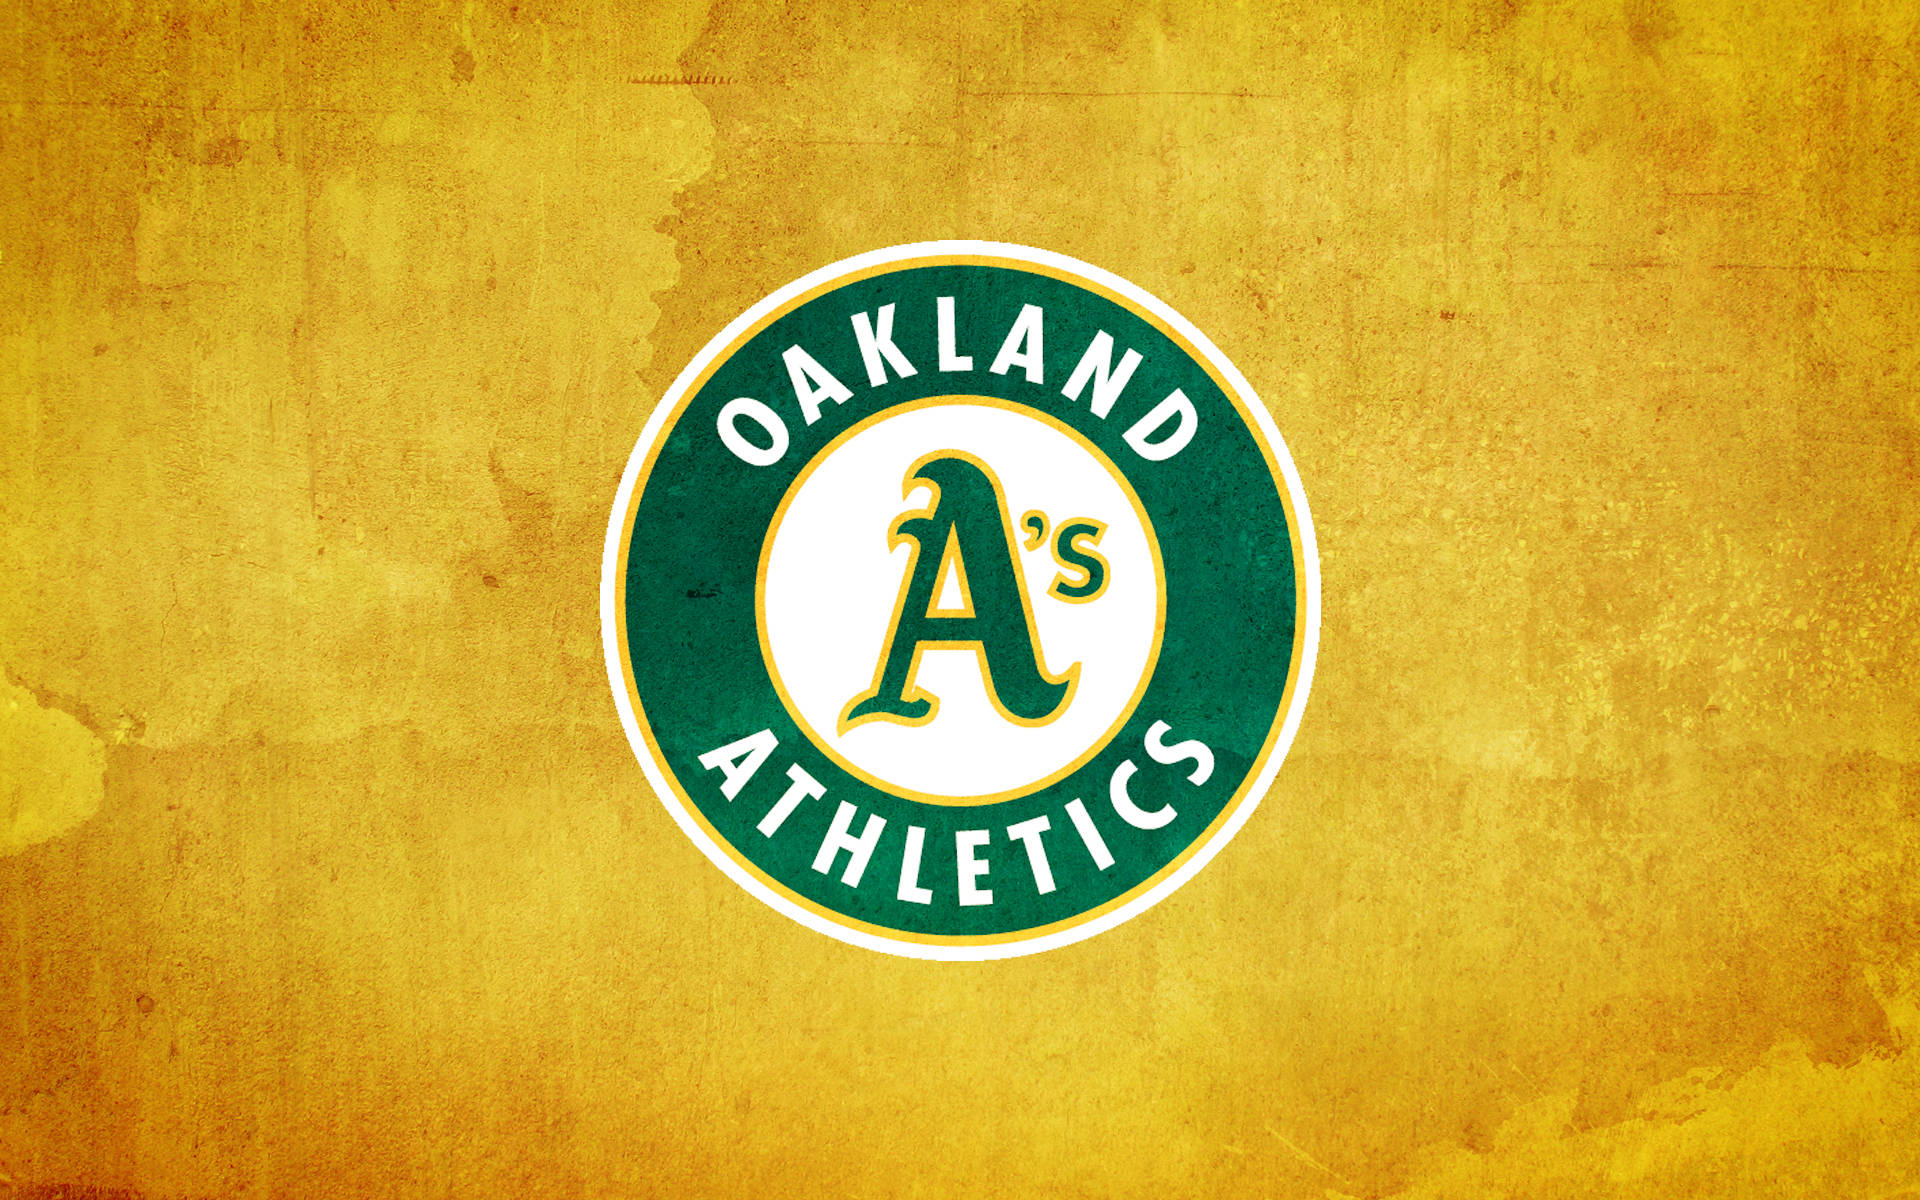 Top 999+ Oakland Athletics Wallpaper Full HD, 4K✅Free to Use